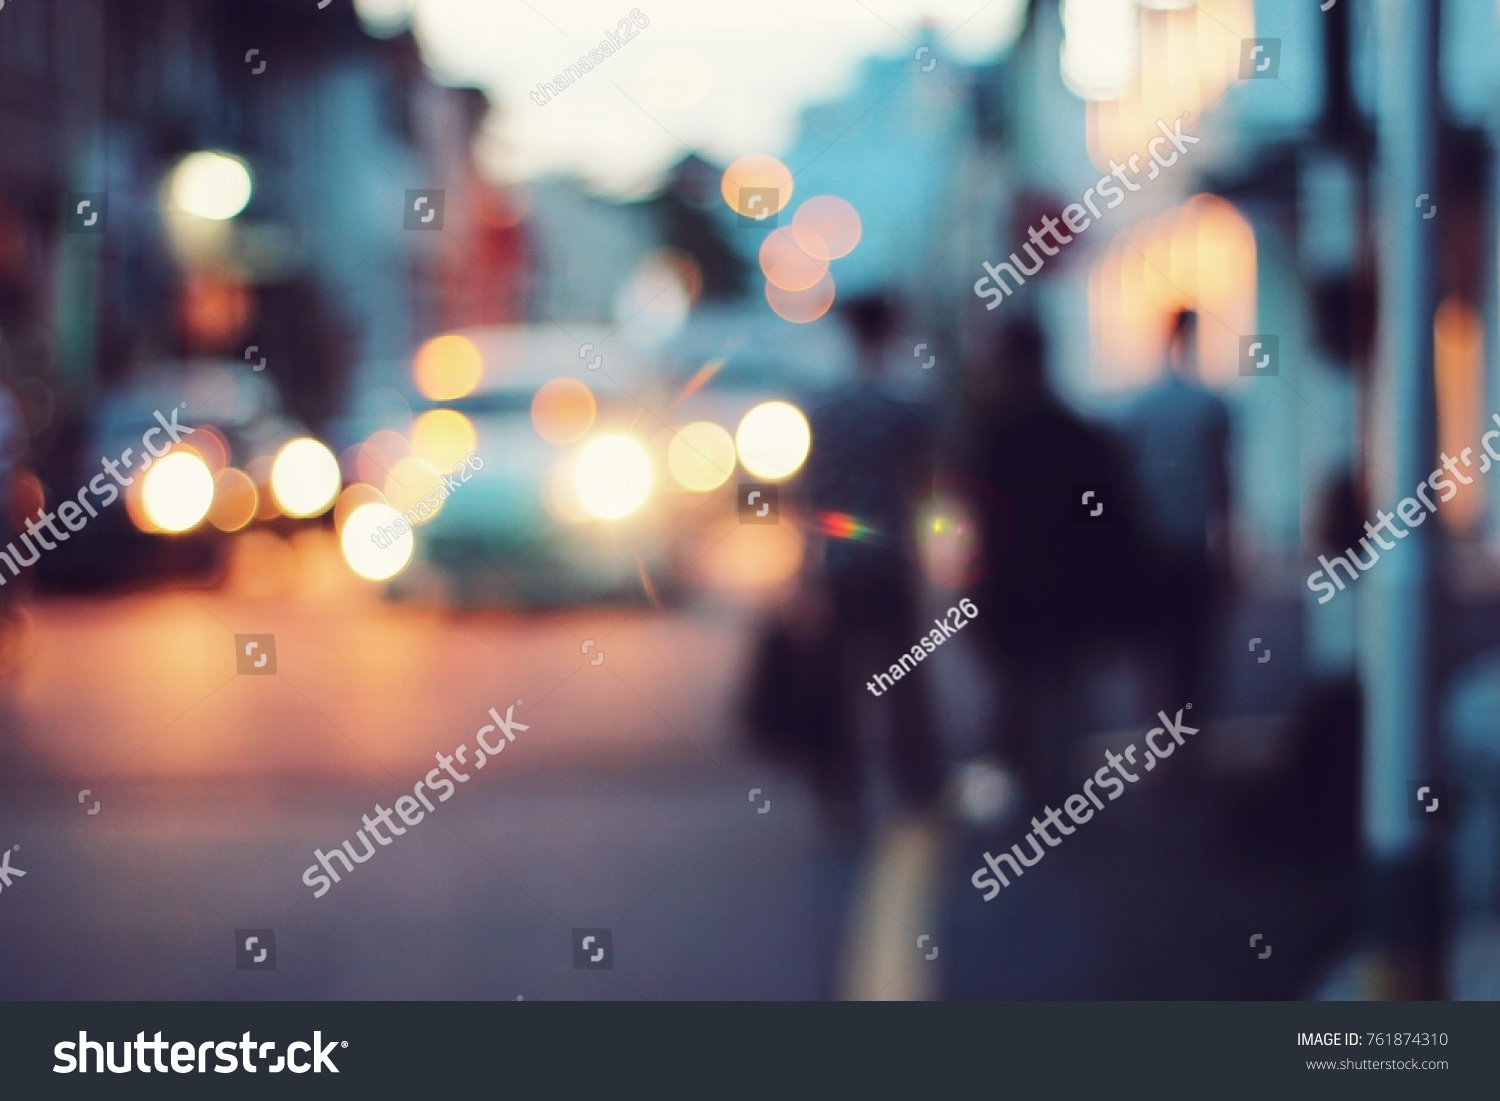 24,662 Blurred people walking night Images, Stock Photos & Vectors ...